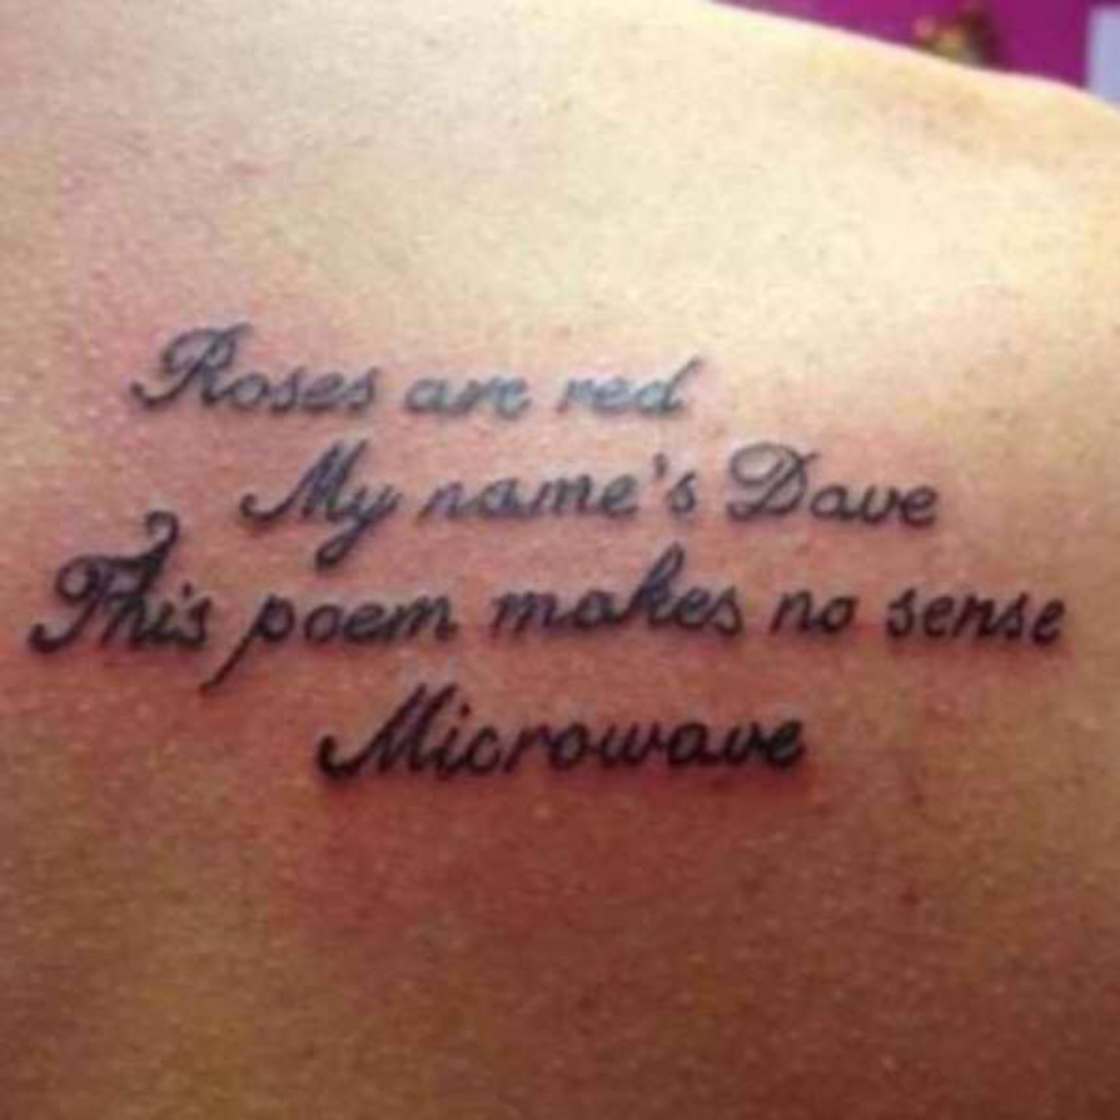 bad tattoo fails - Roses are red My name's Dave This poemn makes no sense Microwave